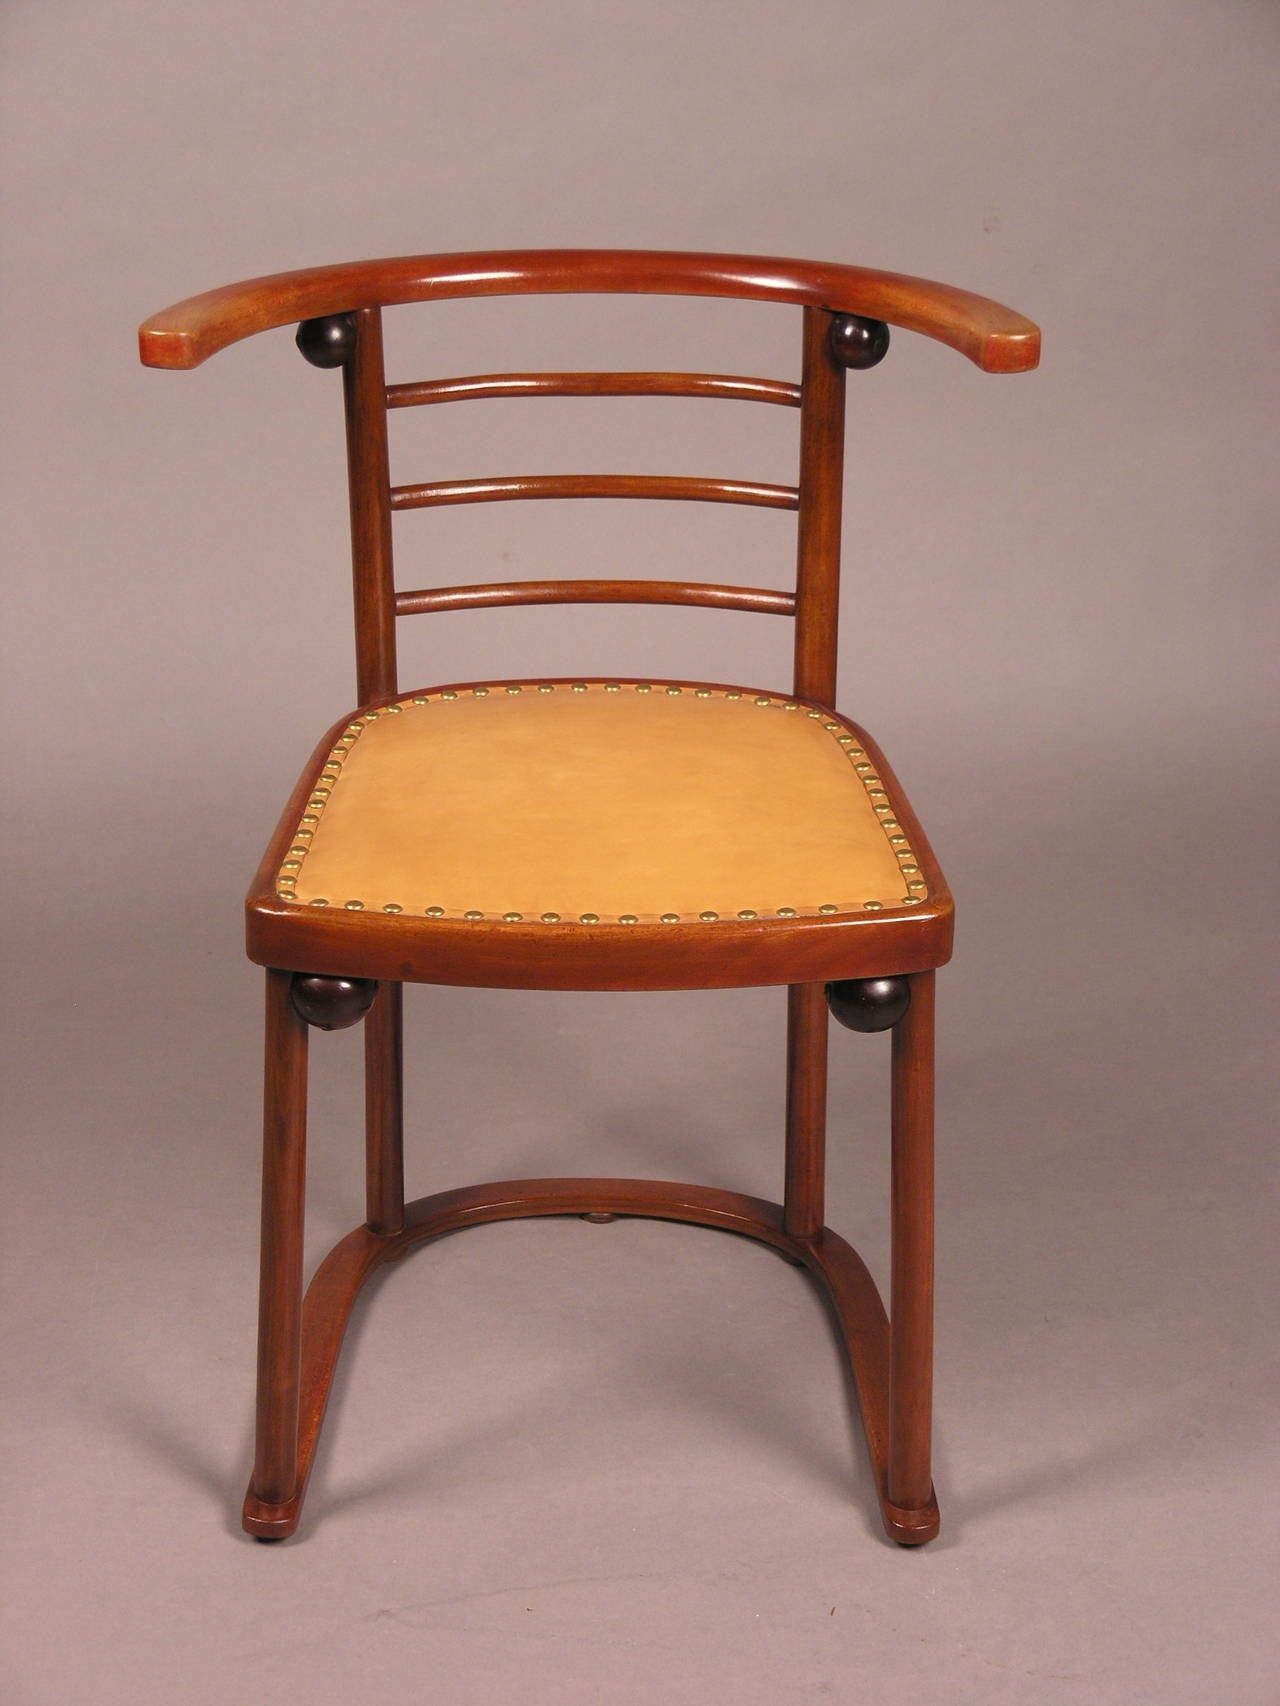 This chair was published as part of the set No. 728 in the Bentwood Sales Catalogue of Jacob & Josef Kohn in 1906. Its basic form is the horseshoe, which is present in its base and in the back and arm rests. Four straight rods connect these two